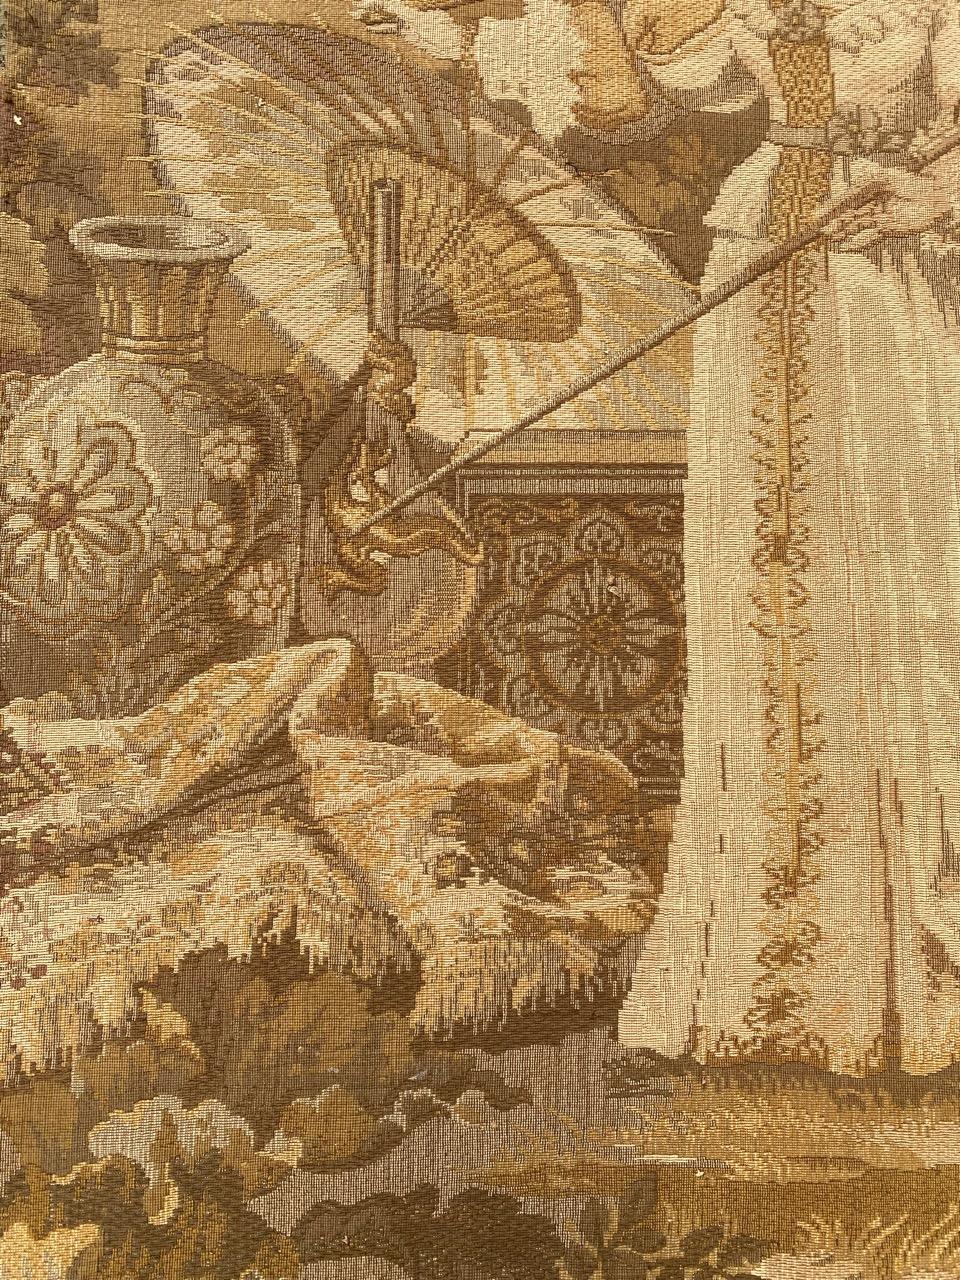 Wool Pretty Antique French Jaquar Tapestry